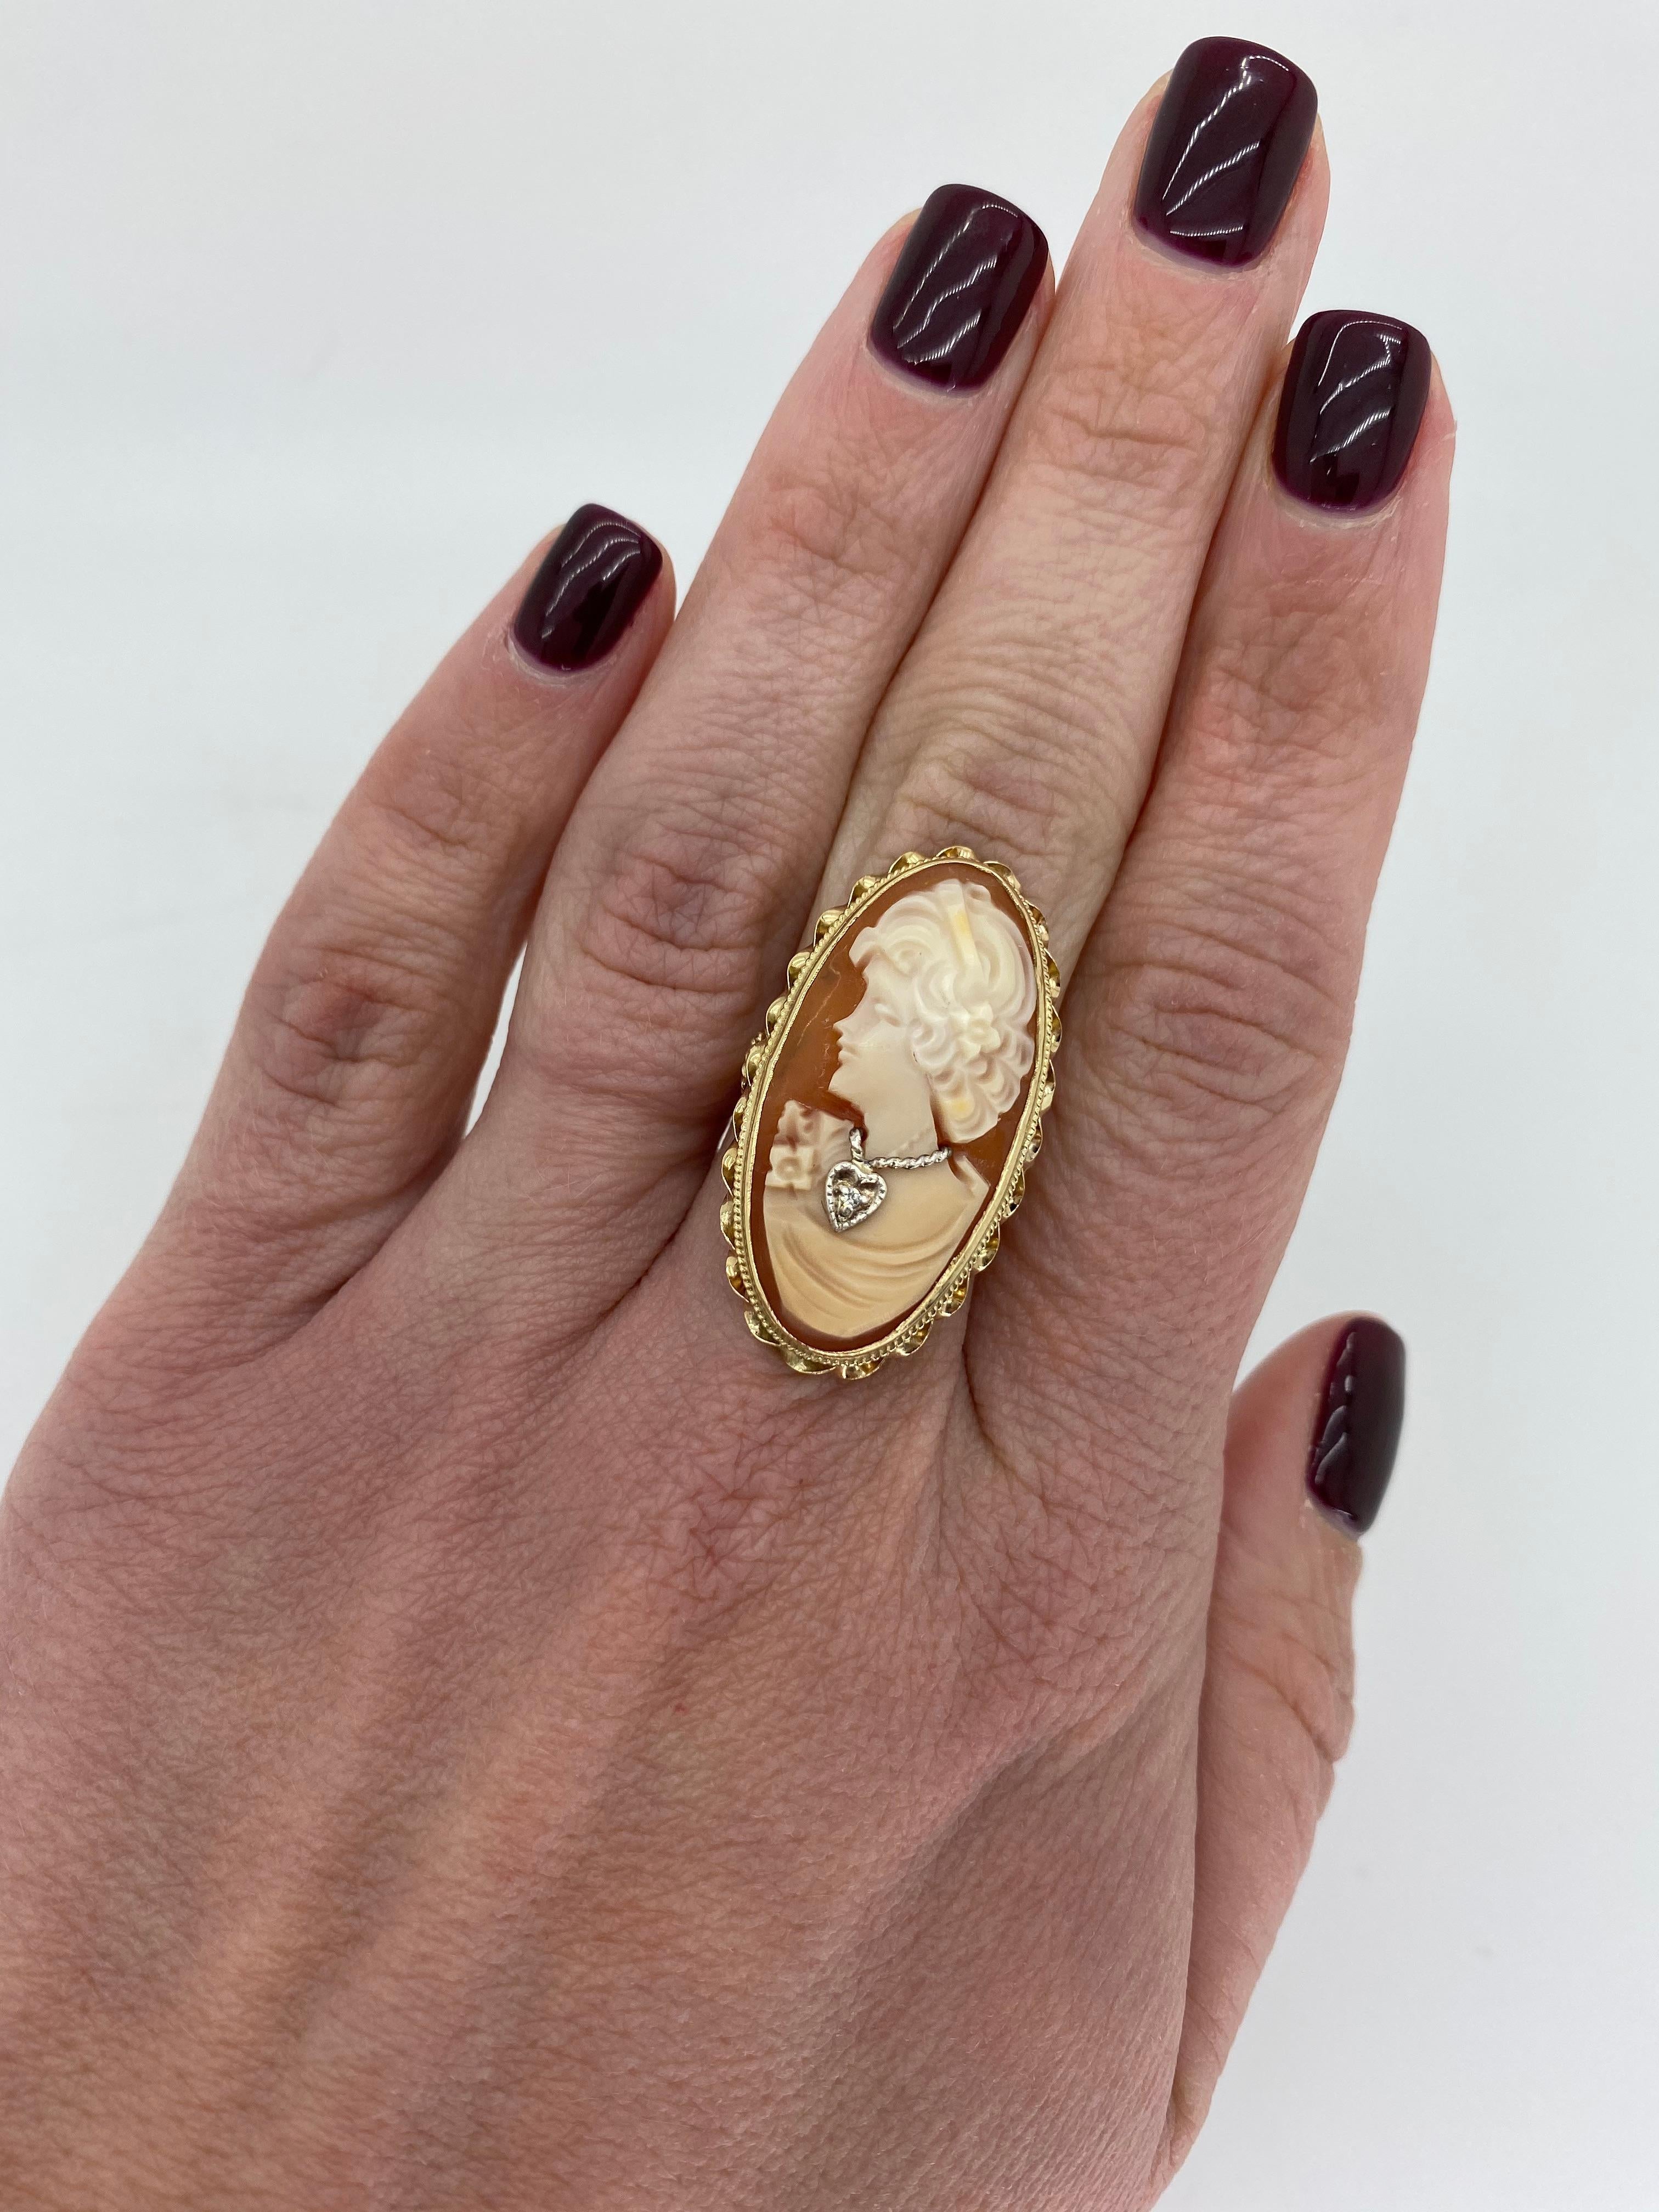 Vintage Cameo ring with a diamond accent crafted in 14k yellow gold. 

Cameo: Approximately 33x19mm 
Diamond Carat Weight:  Approximately .0025CTW
Diamond Cut: Old European Cut
Color: G-I
Clarity:  SI
Metal: 14K Yellow Gold
Marked/Tested: Tested 14K